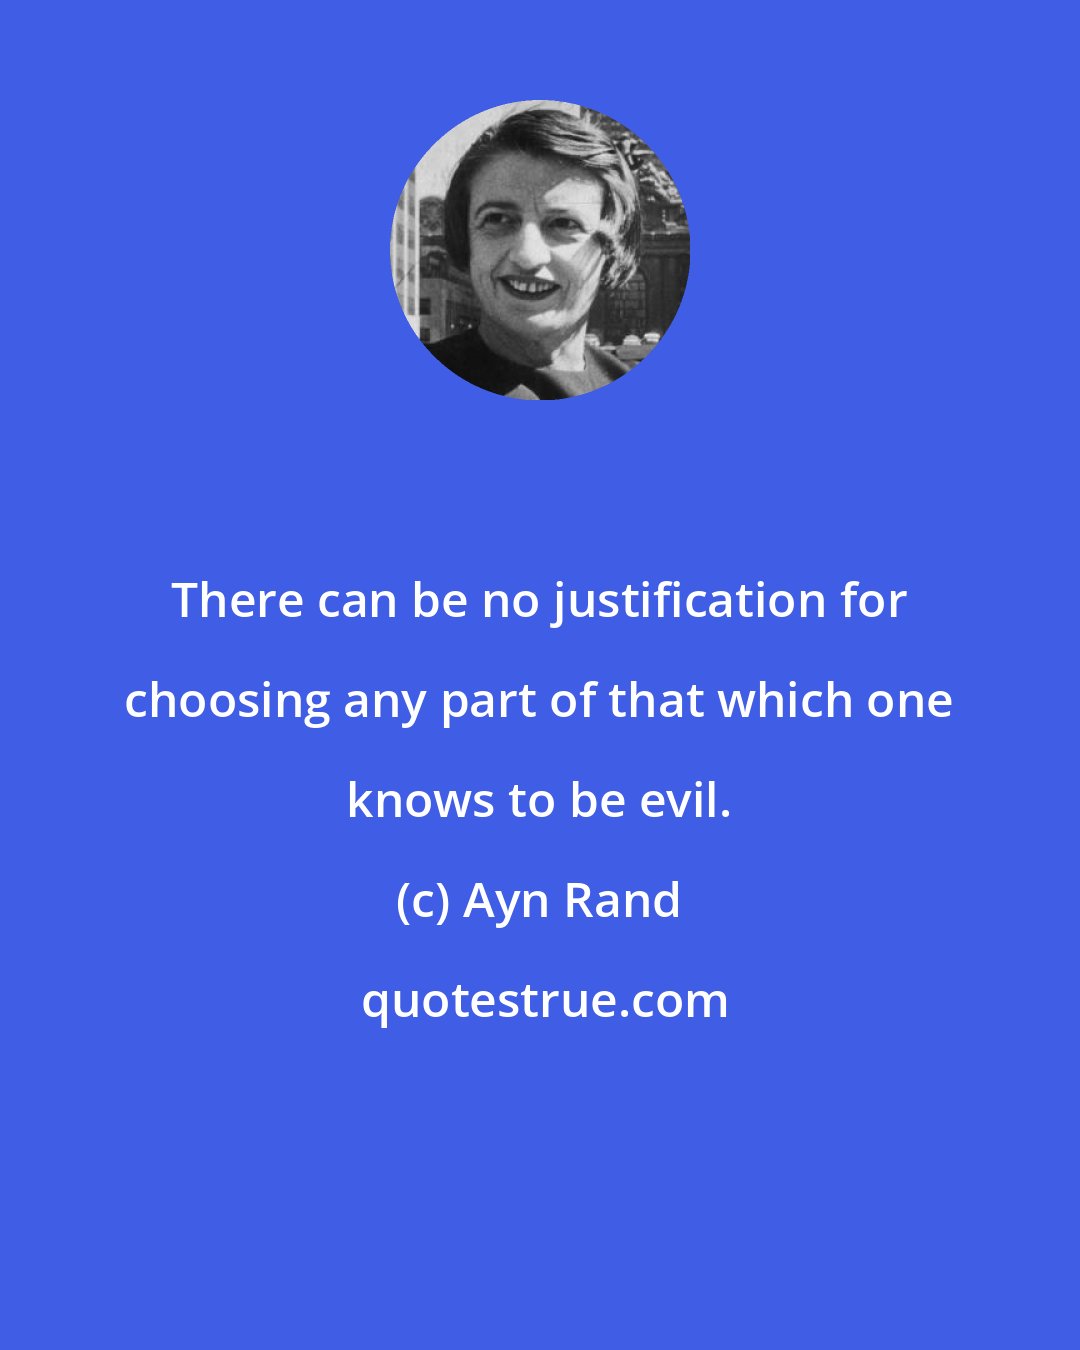 Ayn Rand: There can be no justification for choosing any part of that which one knows to be evil.